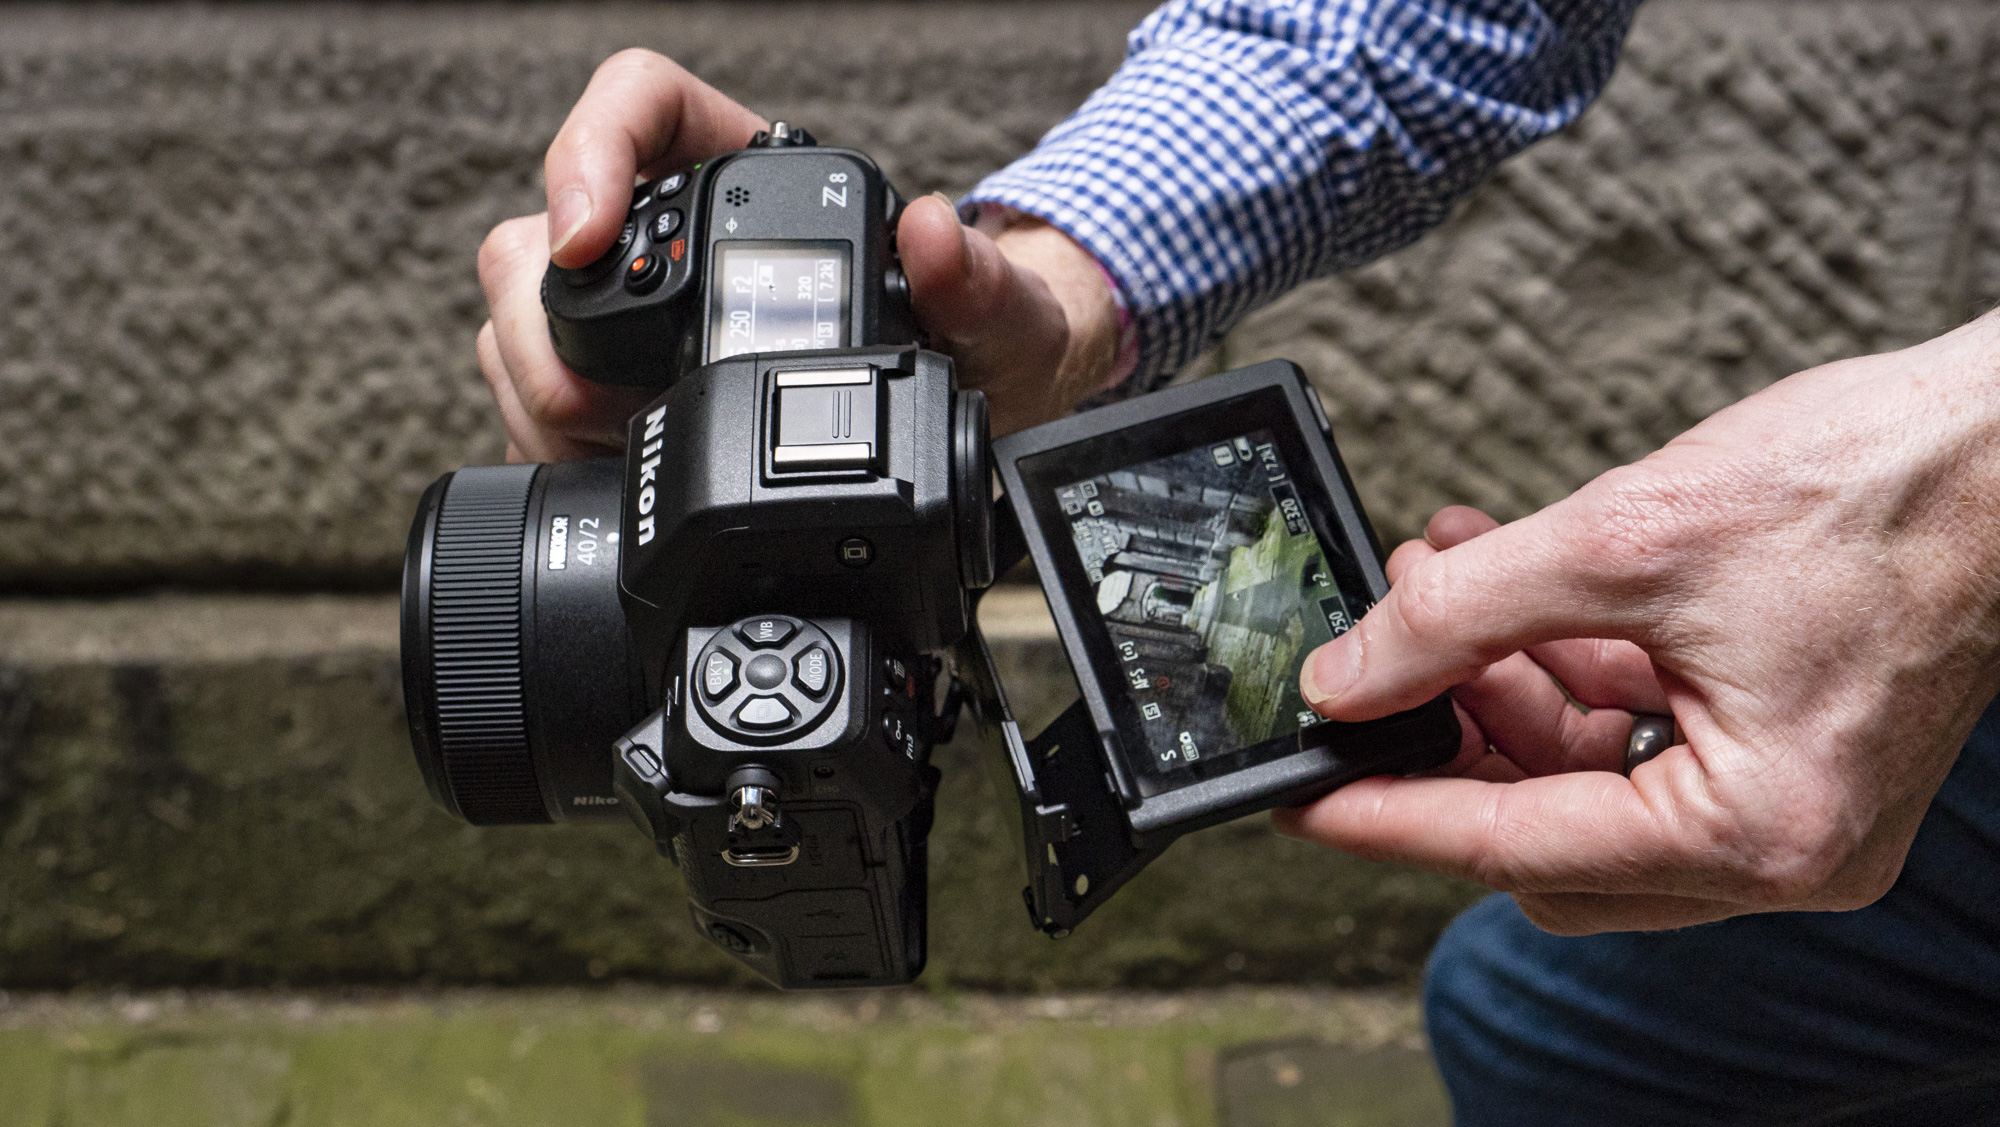 Nikon Z8 camera in the hand with screen pulled out